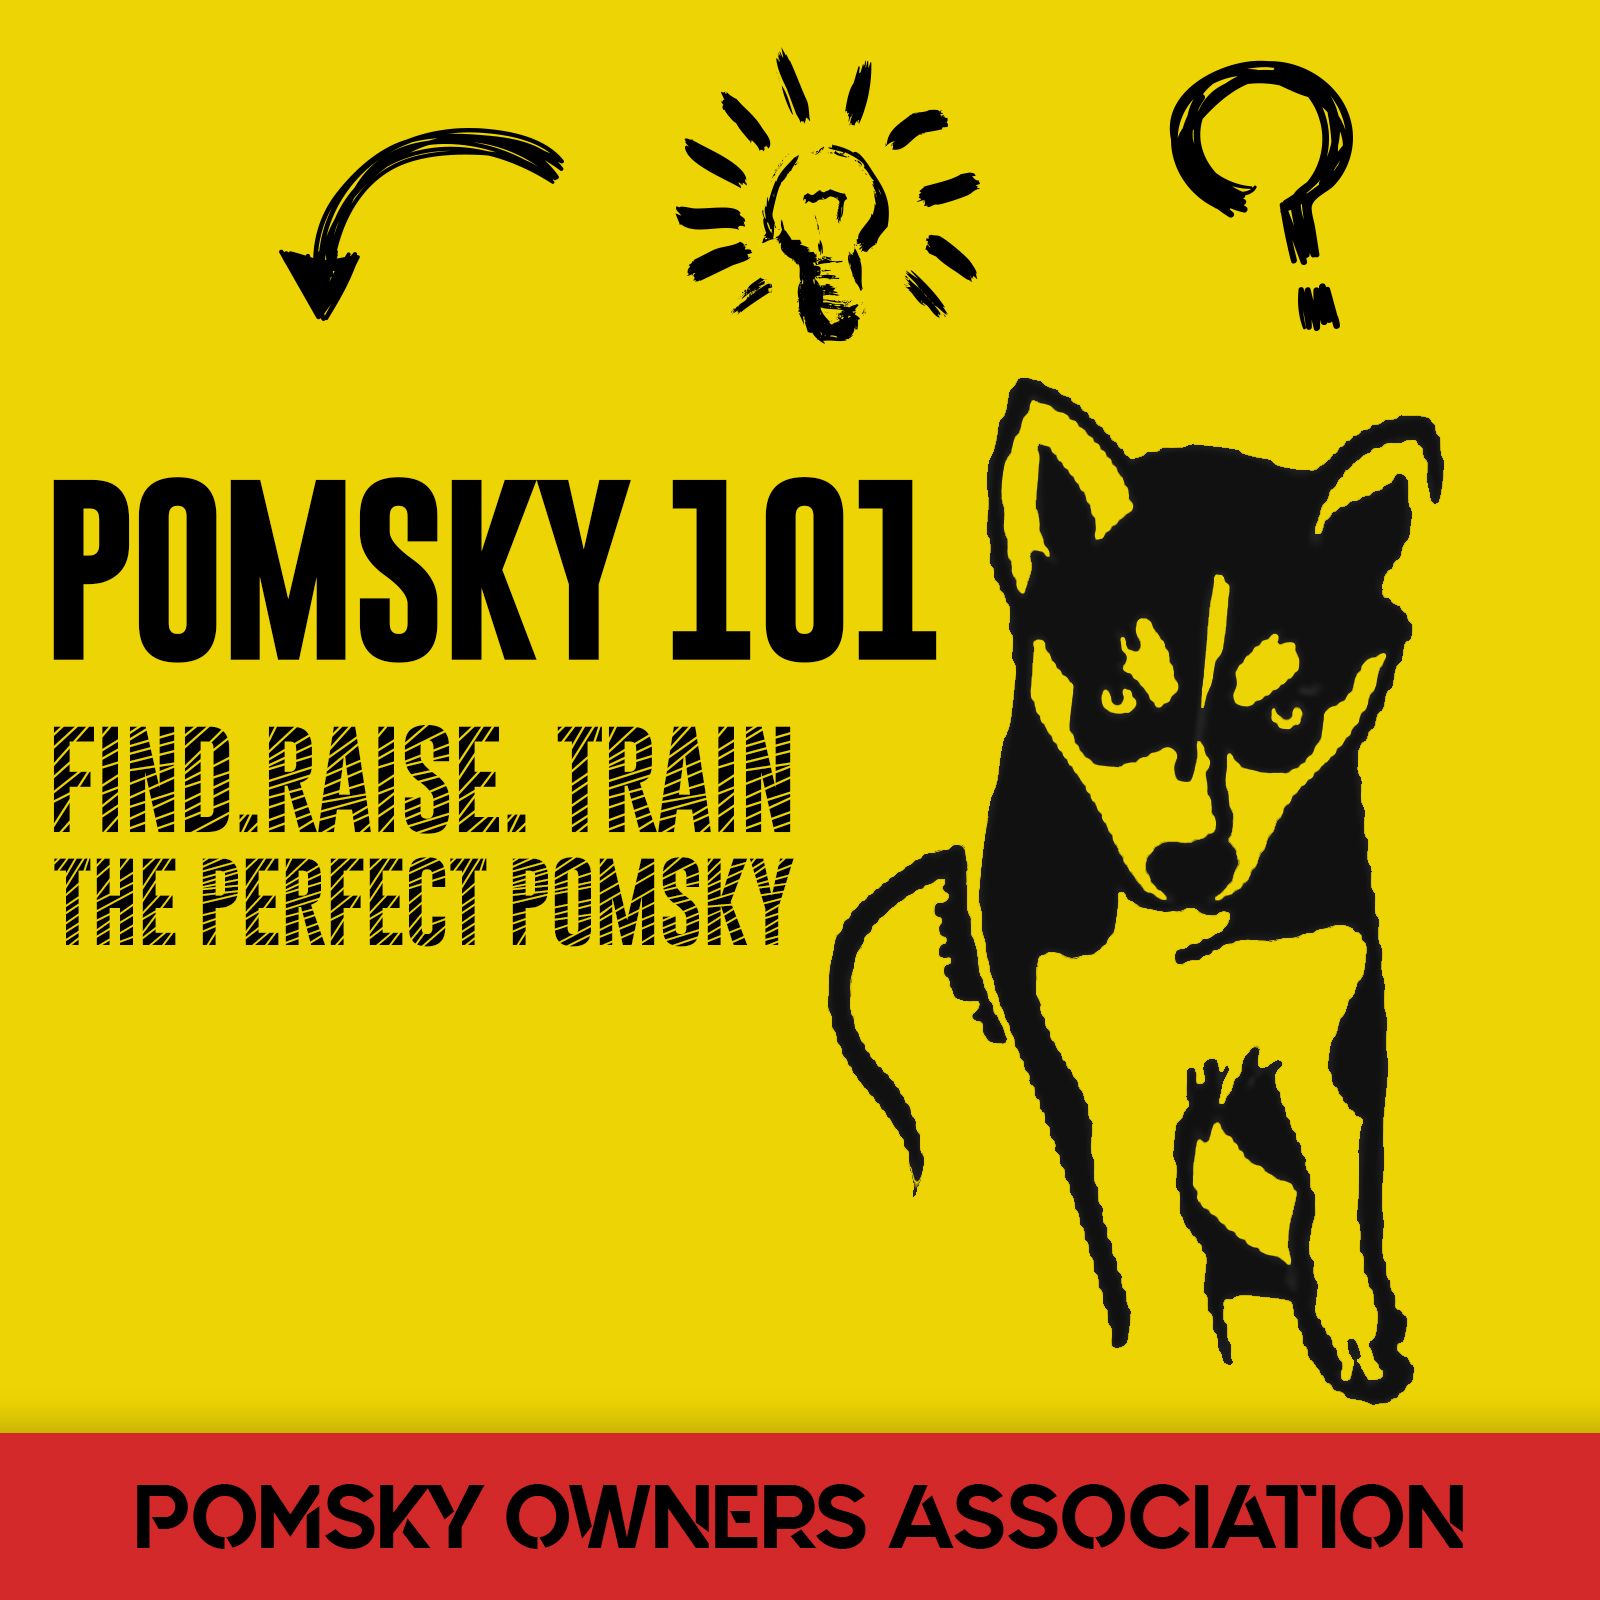 022 – Leaving Your Pomsky at Home: Do’s and Don’ts